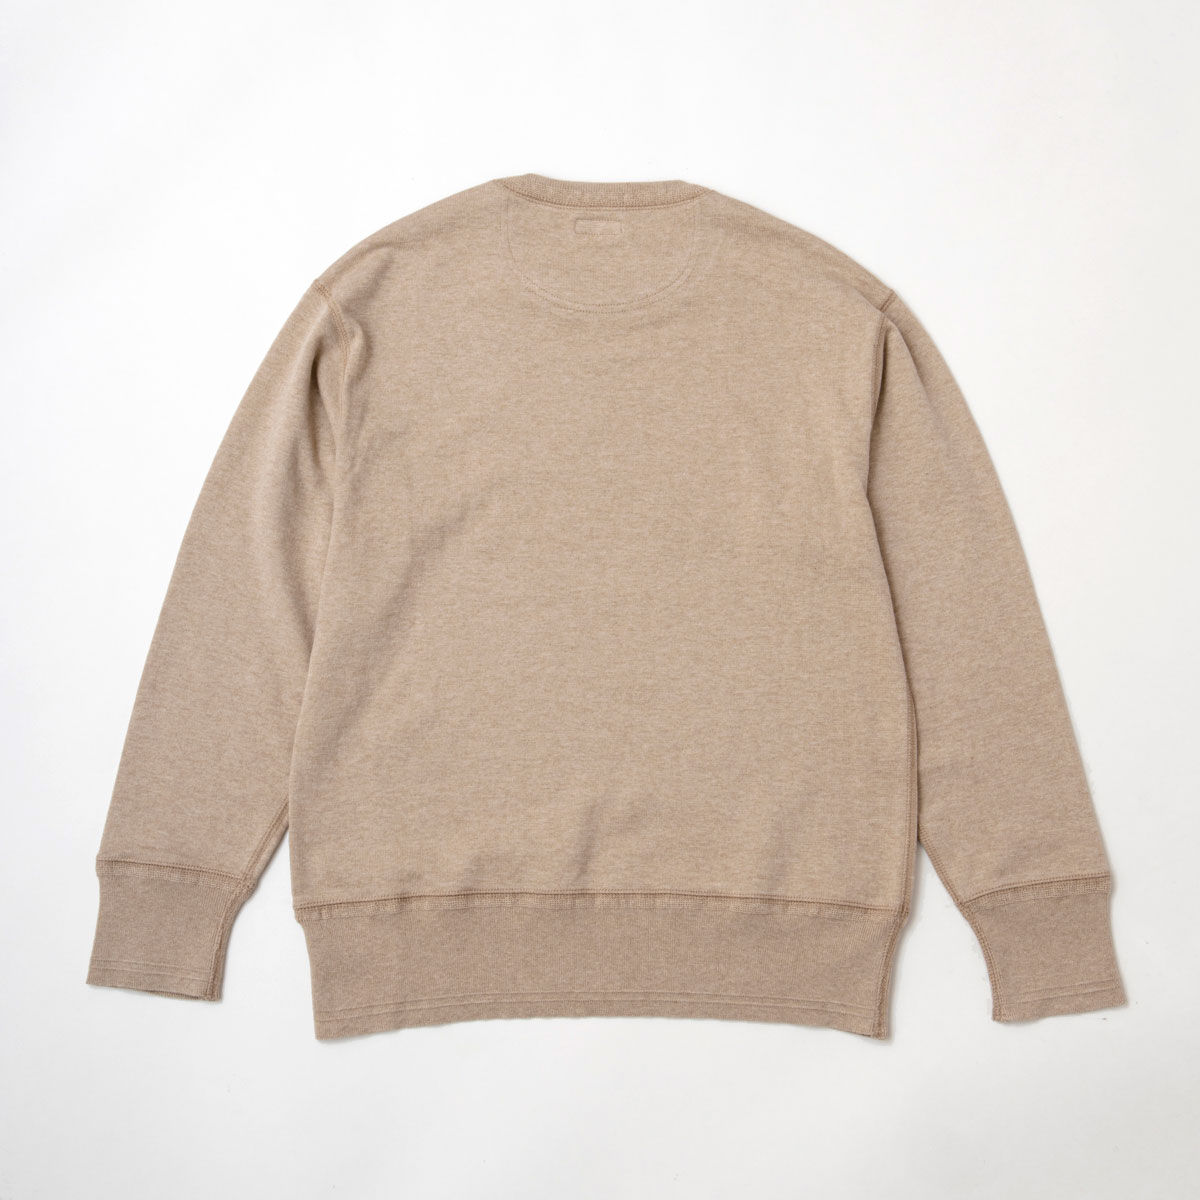 RAGTIME HEATHER MIX COTTON KNITTED AZE RIB SWEATER L/S (CAMEL